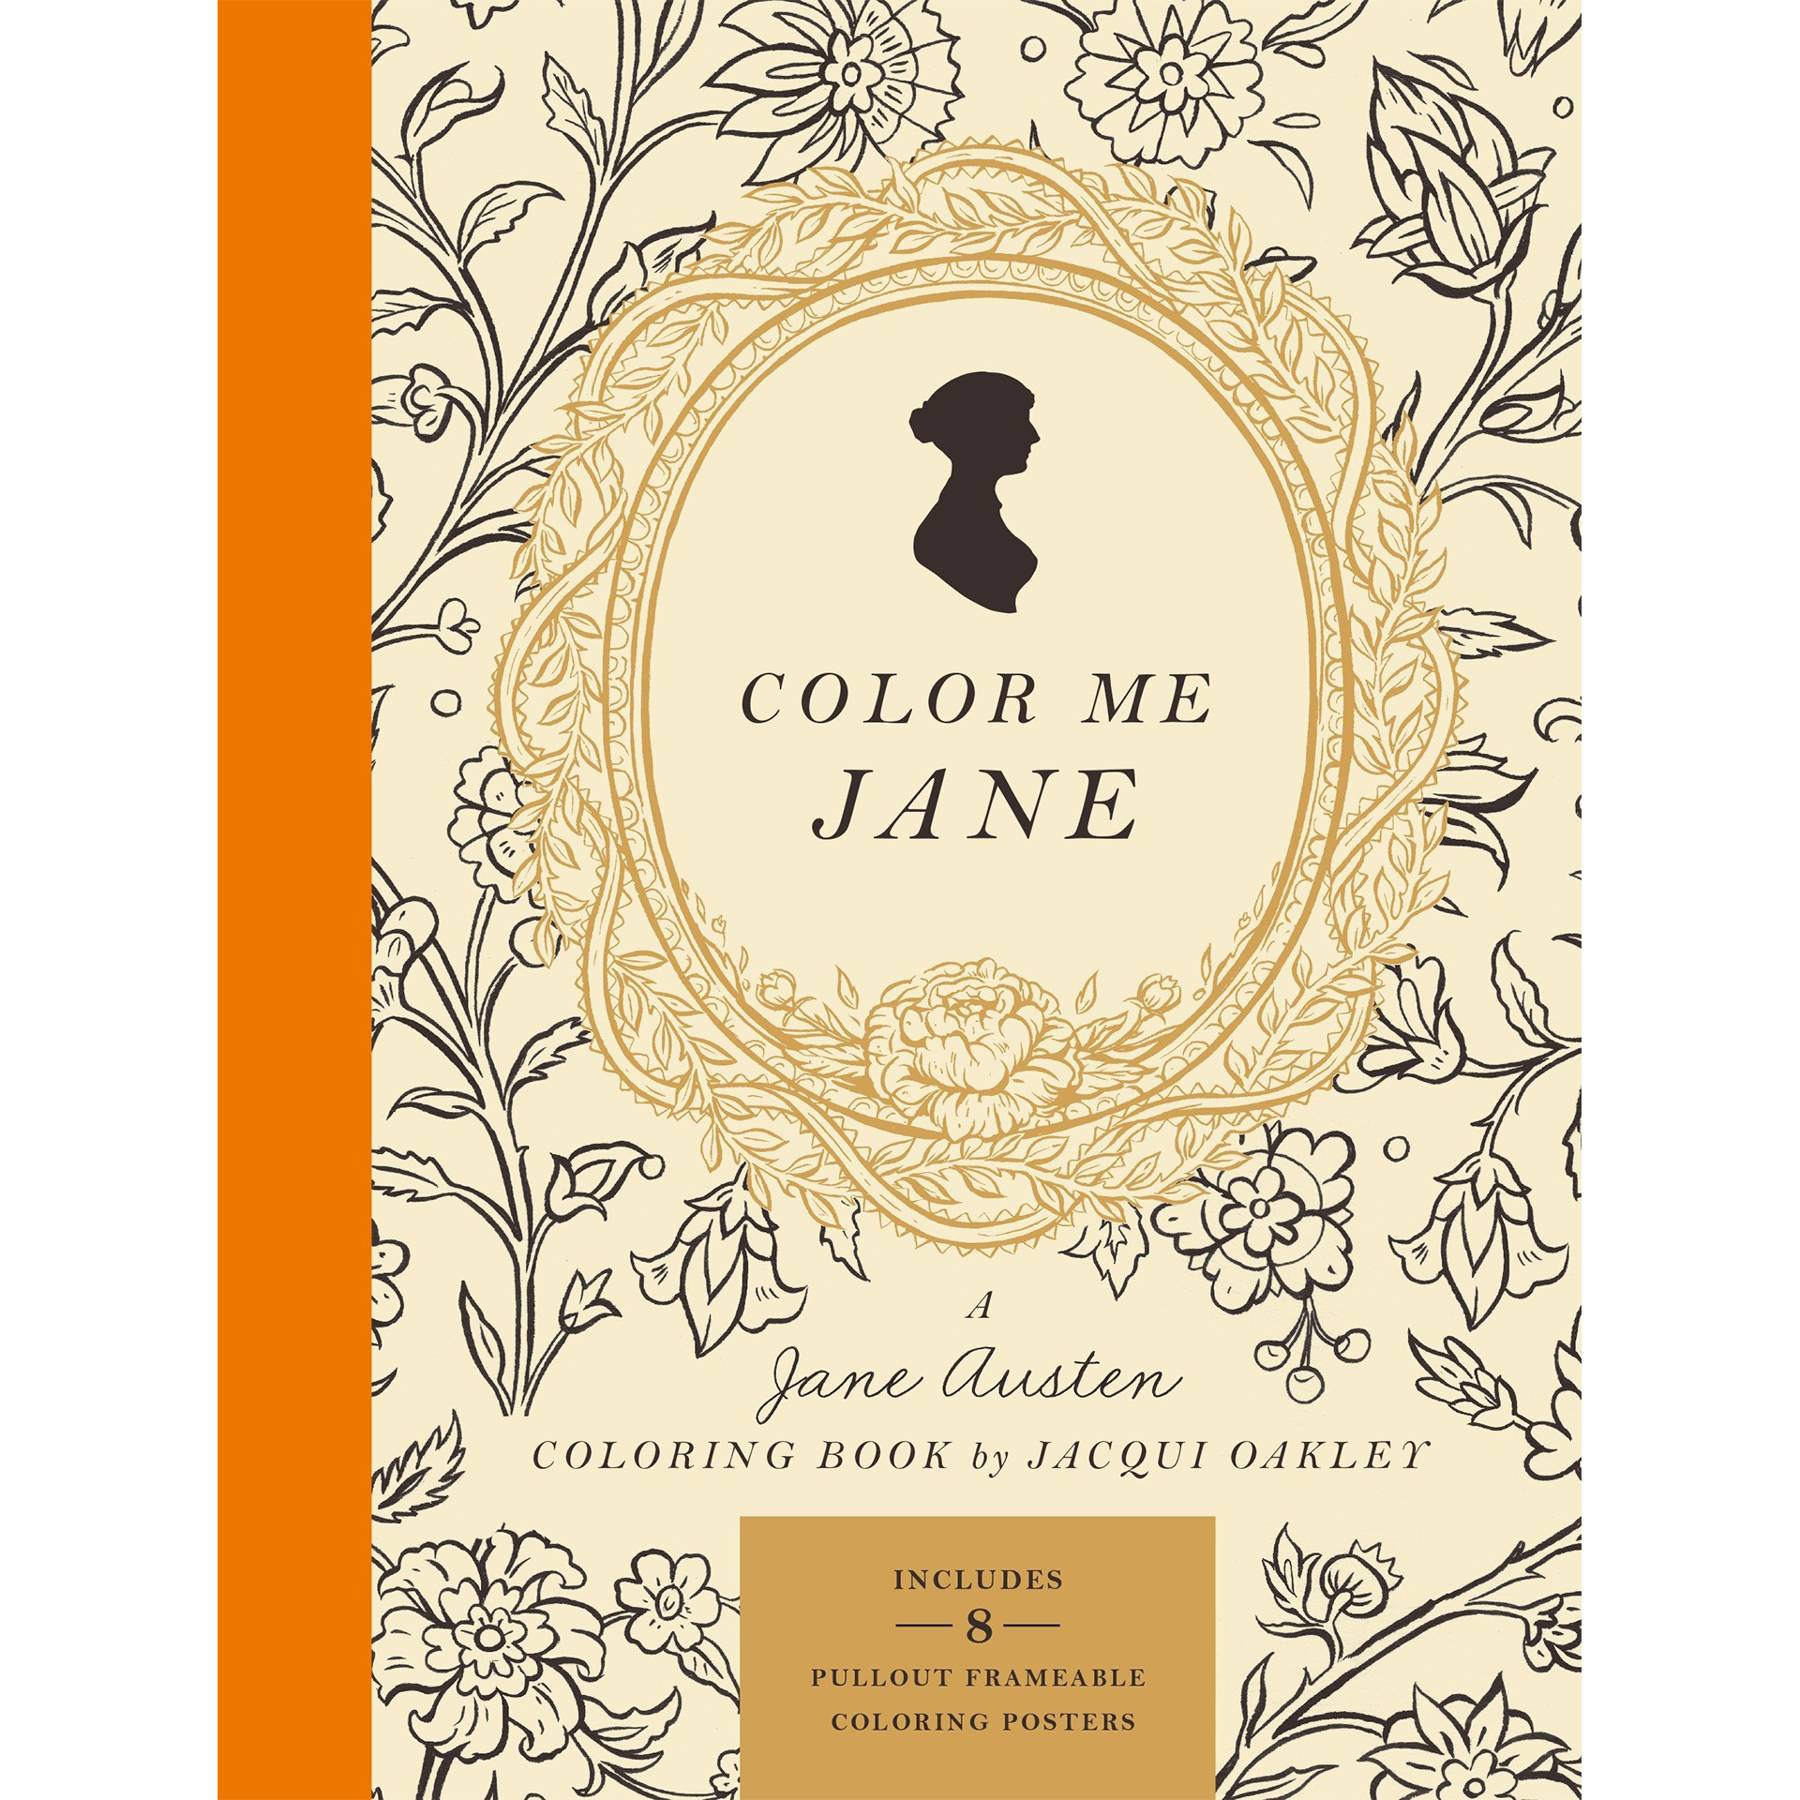 Download 15 Best Adult Colouring Books To Ease Your Anxiety In Lockdown Glamour Uk